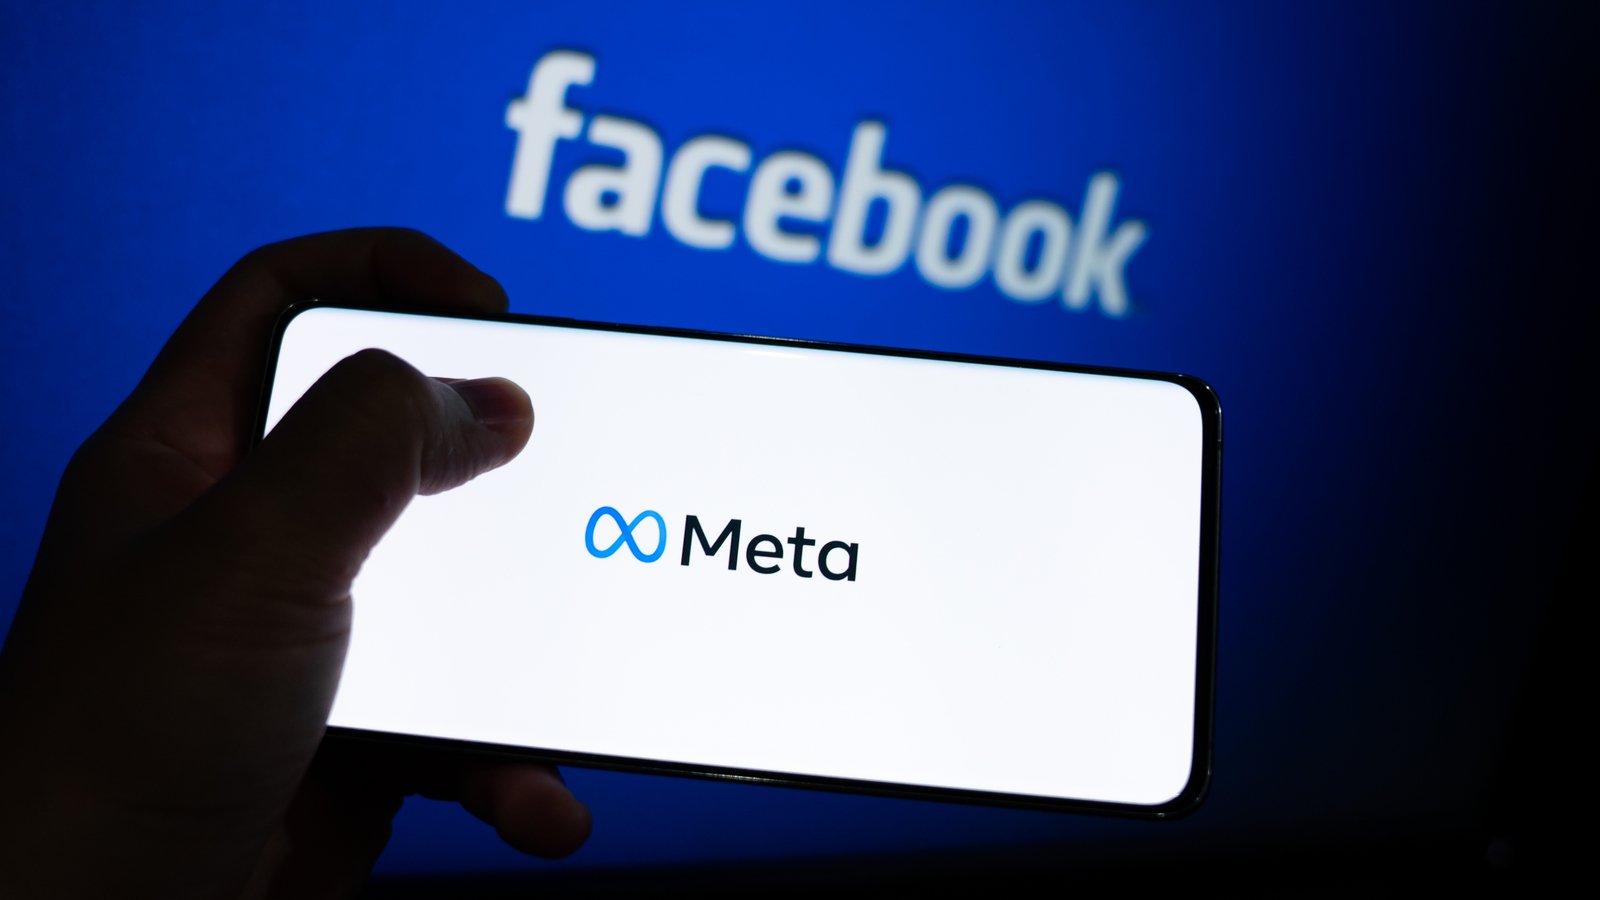 Meta logo is shown on a device screen. Meta is the new corporate name of Facebook representing FB Stock.